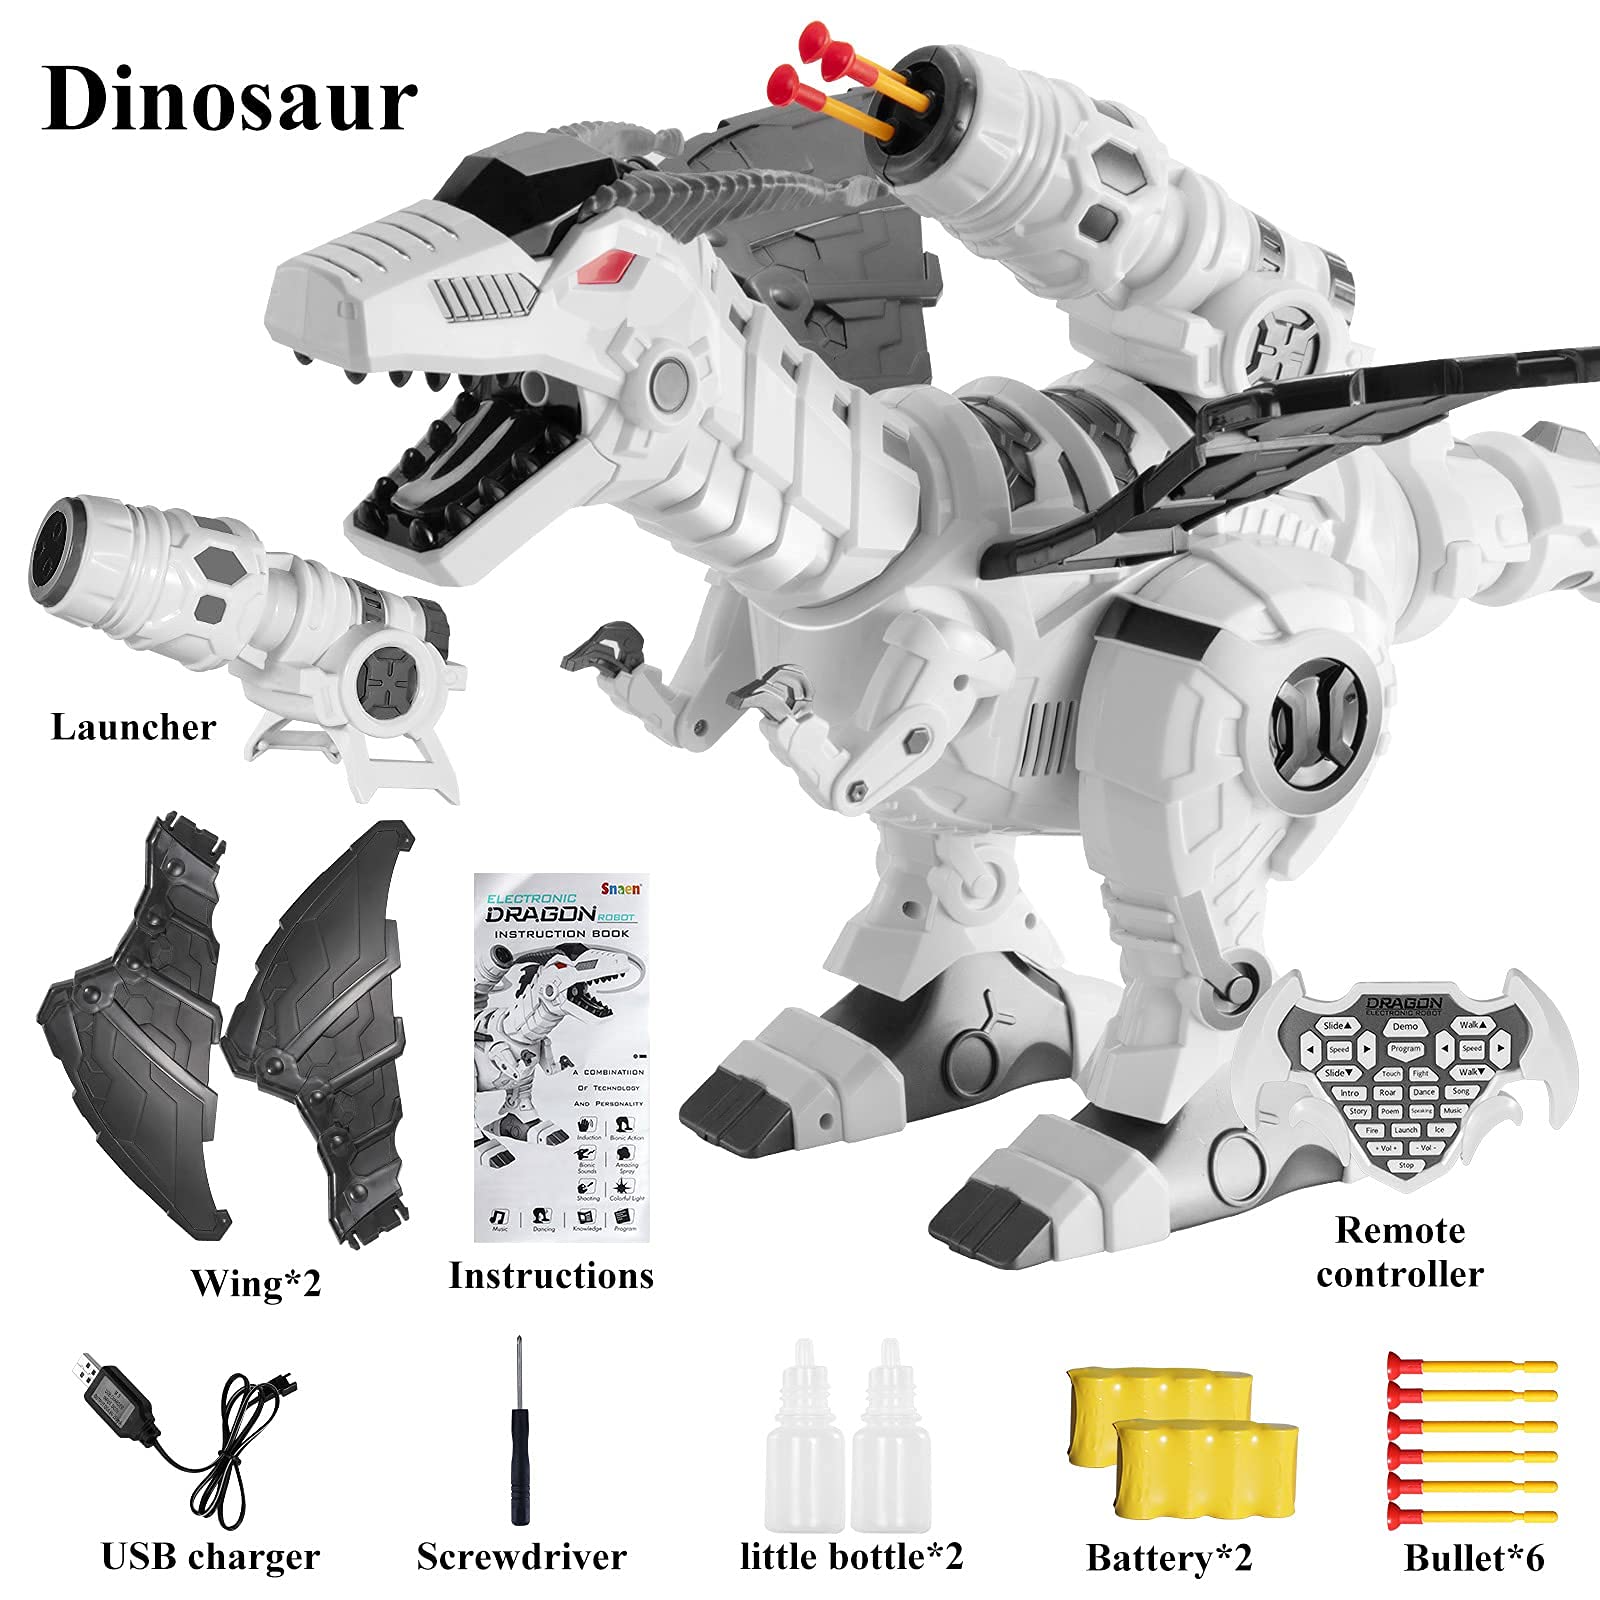 Multifunctional R/C Robotic Dinosaur with Mist Spray and Soft Bullets Shooting, Interactive Electronic Fire Breathing Dragon with Programming, Intelligent Walking T-rex Toy Gift for Kids (White)